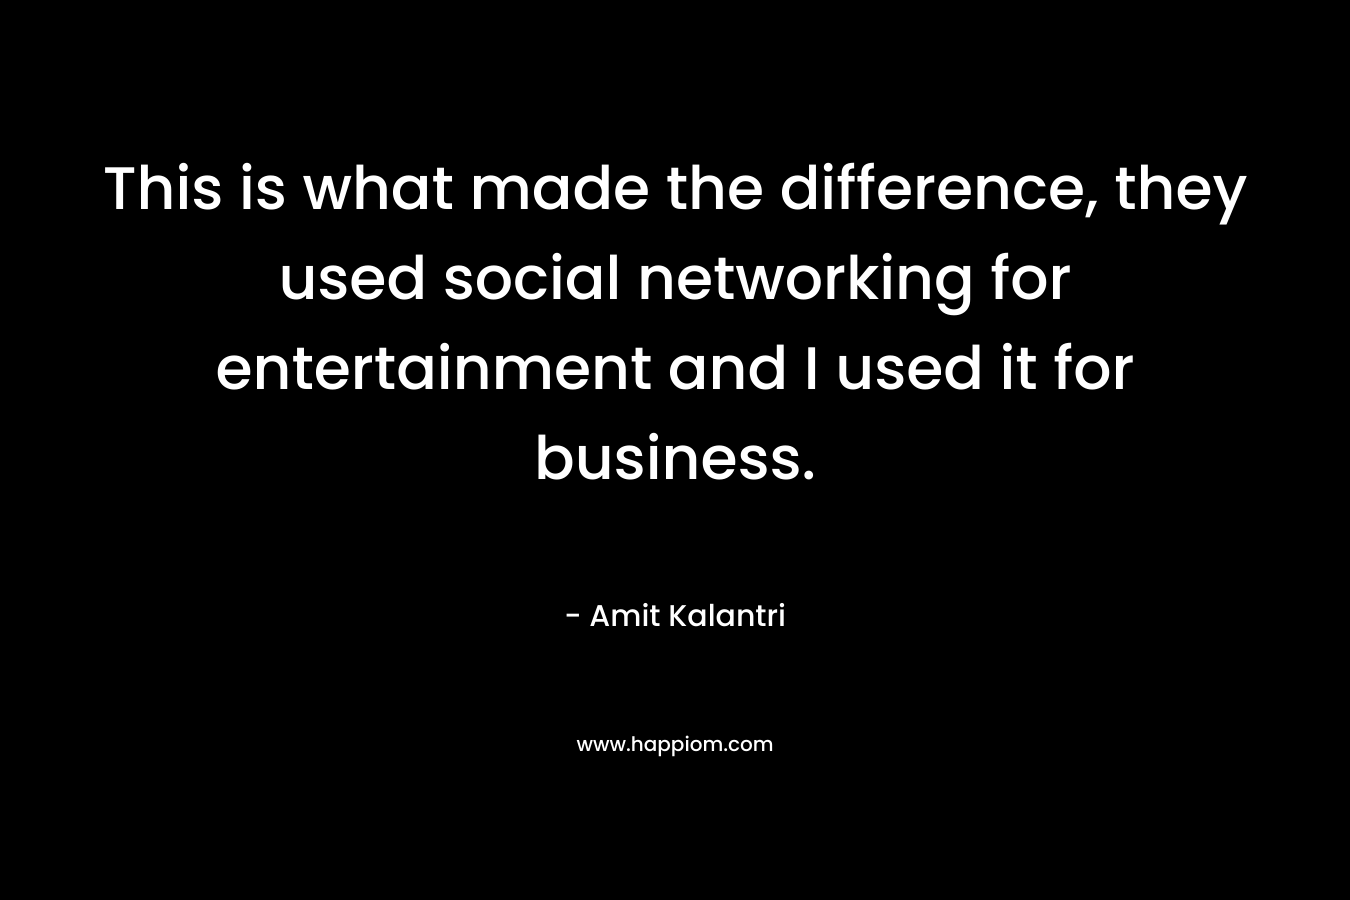 This is what made the difference, they used social networking for entertainment and I used it for business. – Amit Kalantri